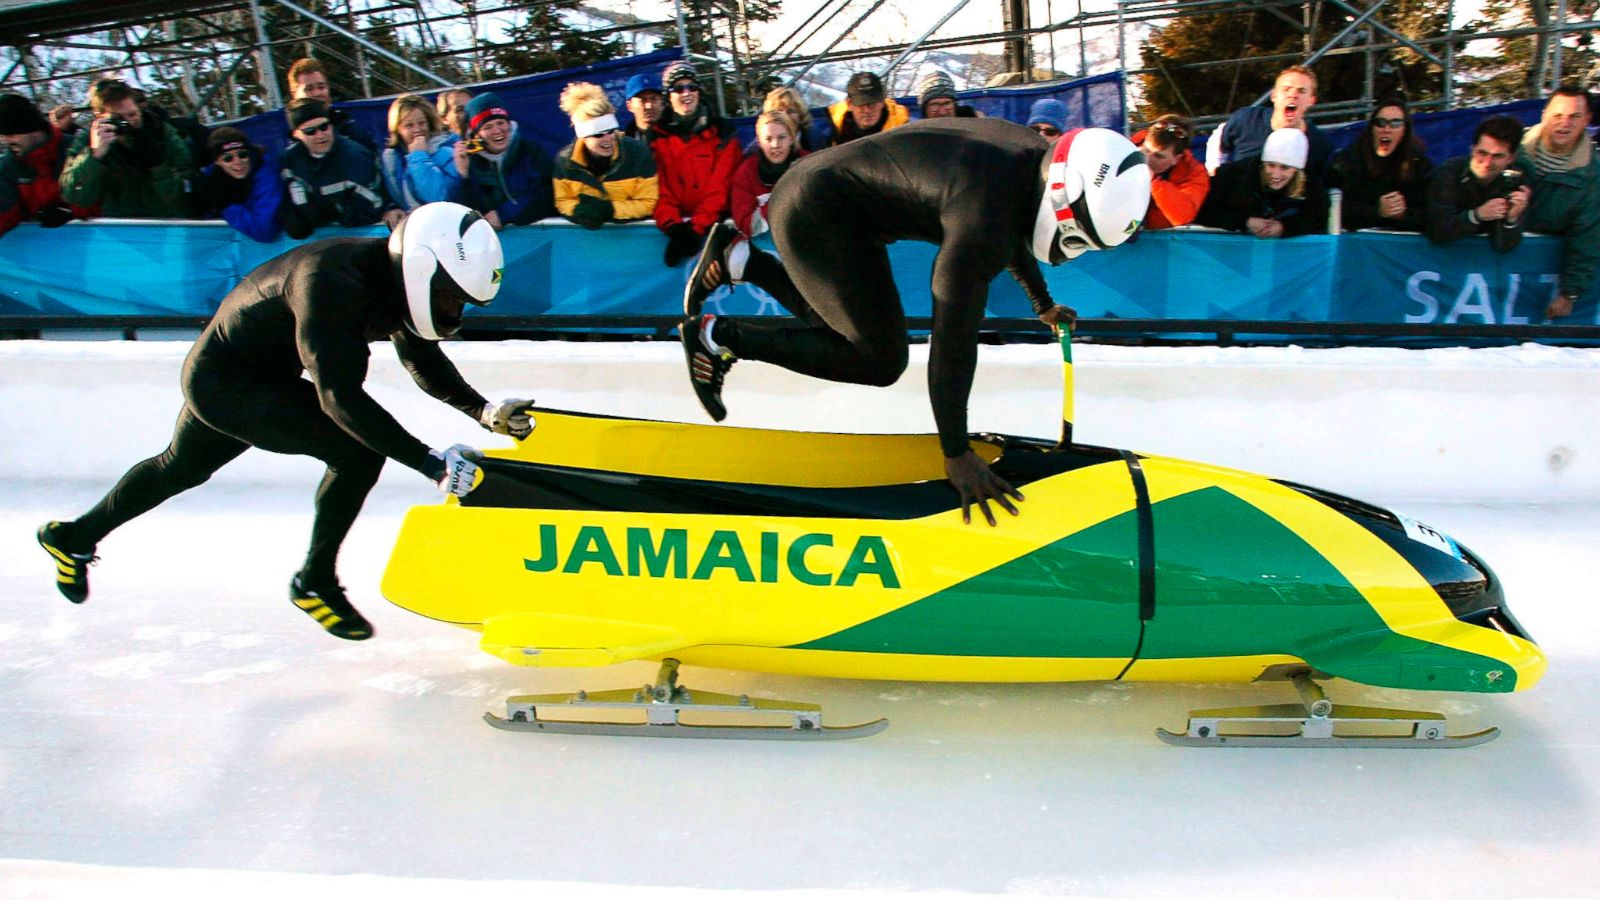 Jamaica Bobsled Team Crowdfunds On Their Way to Olympics